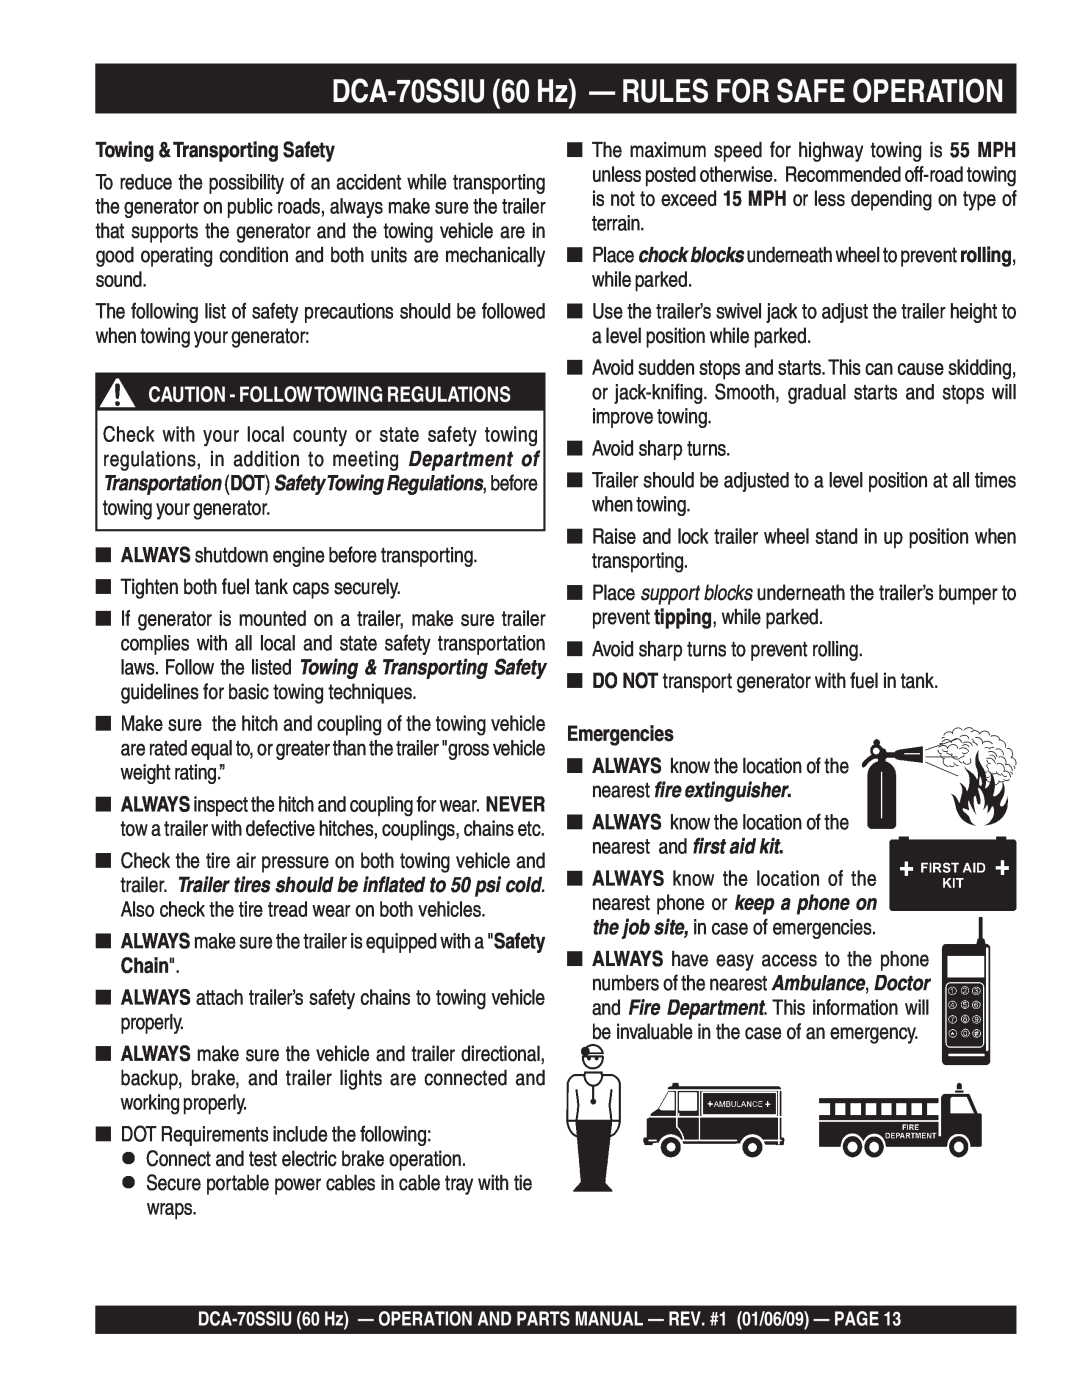 Multiquip M2870300504 Towing &Transporting Safety, Emergencies, DCA-70SSIU 60 Hz - RULES FOR SAFE OPERATION 